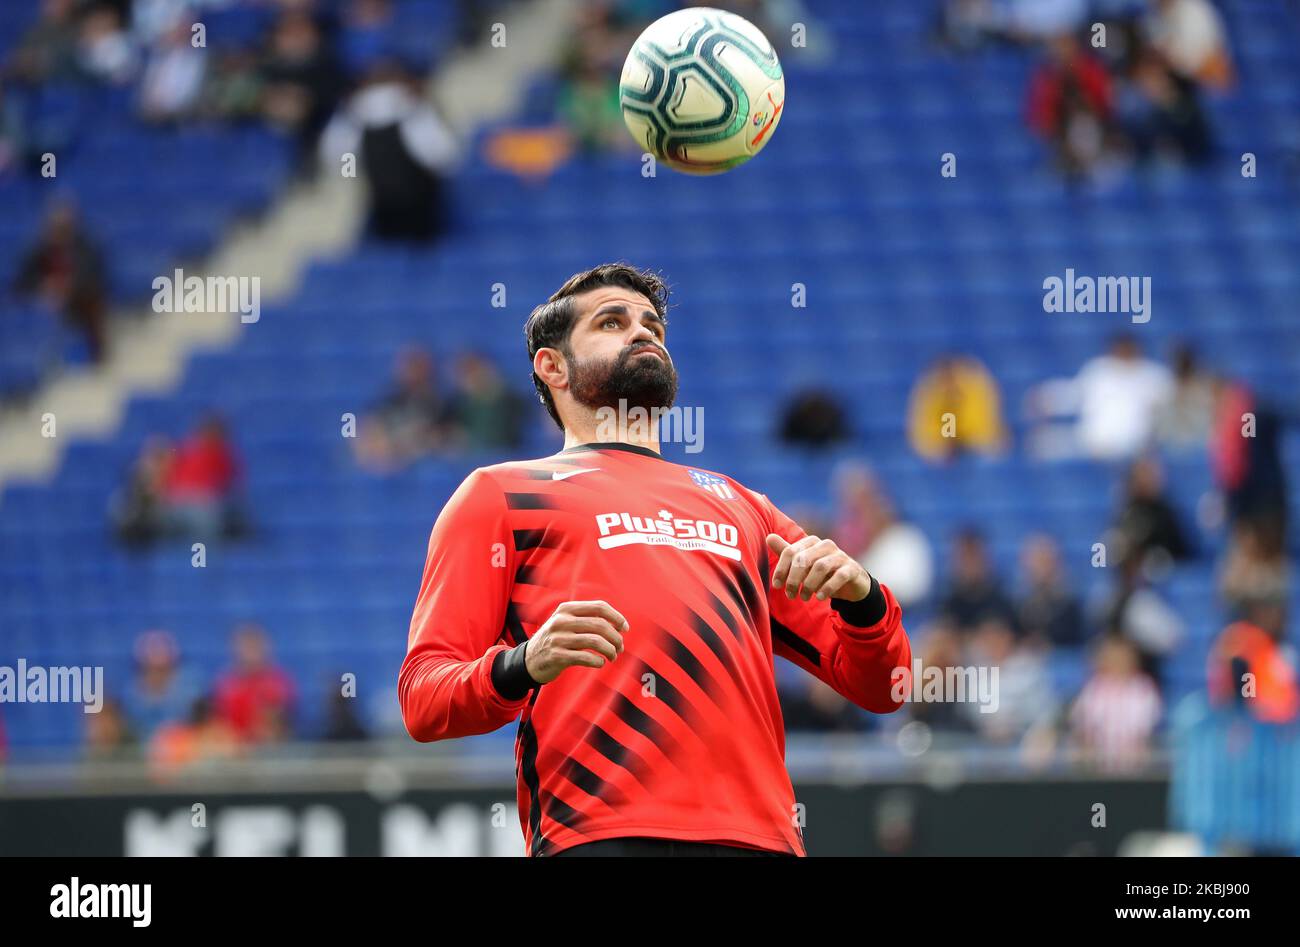 Diego Costa during the match between RCD Espanyol and Atletico de Madrid, corresponding to the week 26 of the Liga Santander, played at the RCDE Stadium, 01st March 2020, in Barcelona, Spain. (Photo by Joan Valls/Urbanandsport/NurPhoto) Stock Photo